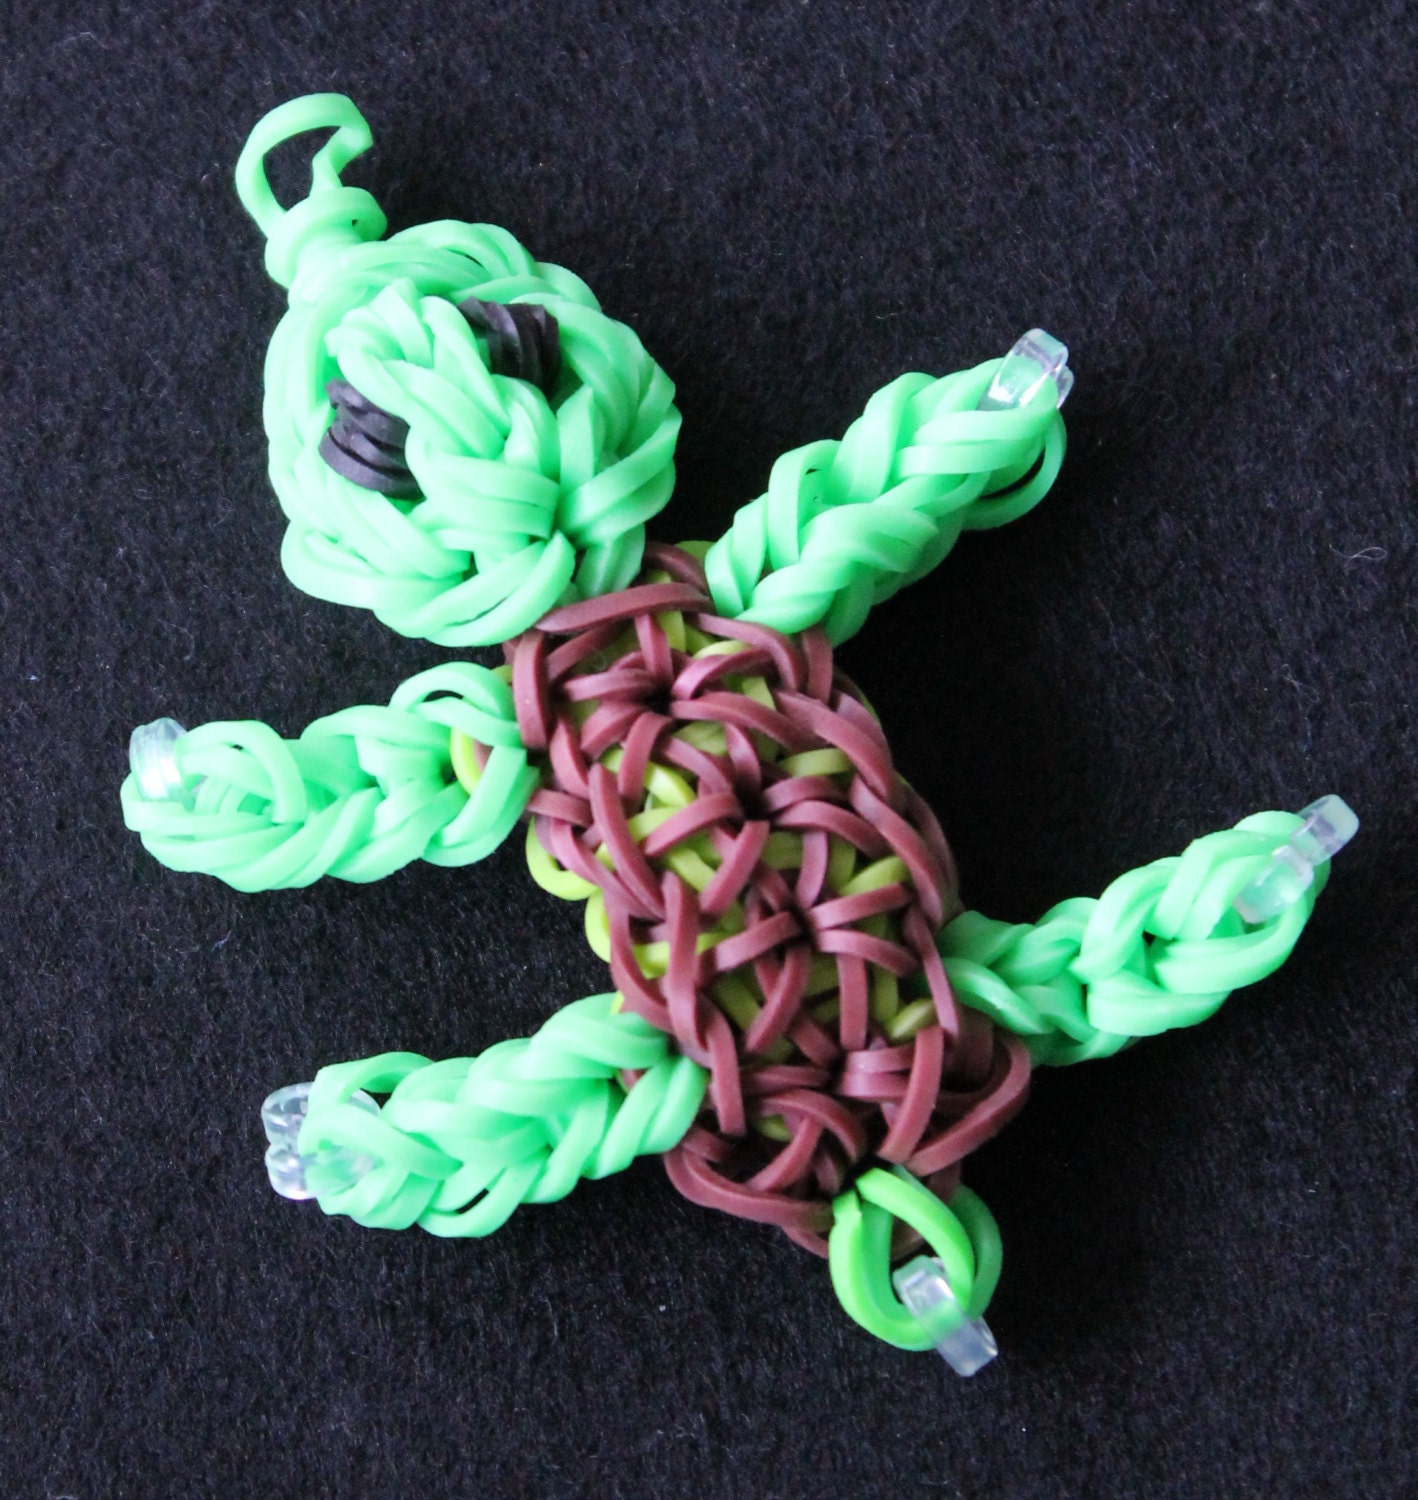 Rainbow Loom Turtle Backpack/keychain Fob by PuddlebackGifts